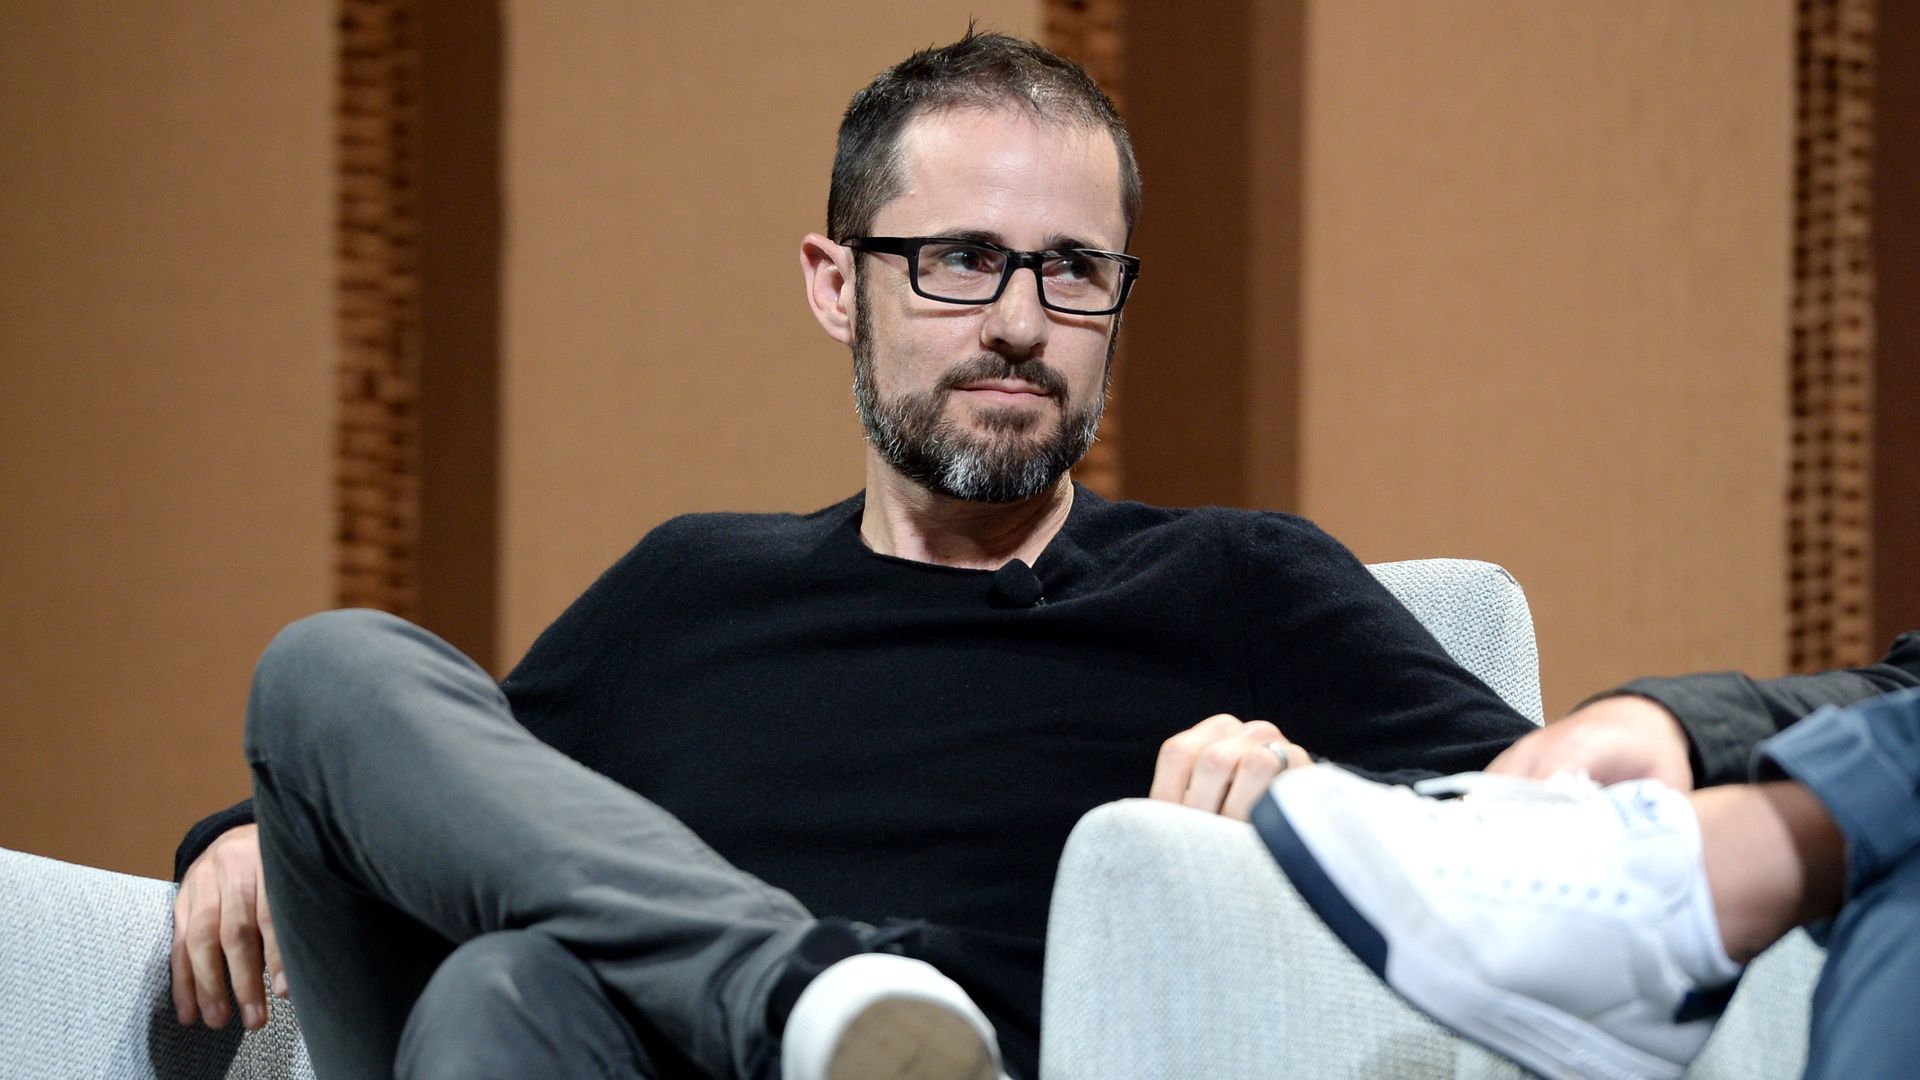 Ev Williams at a 2015 conference.